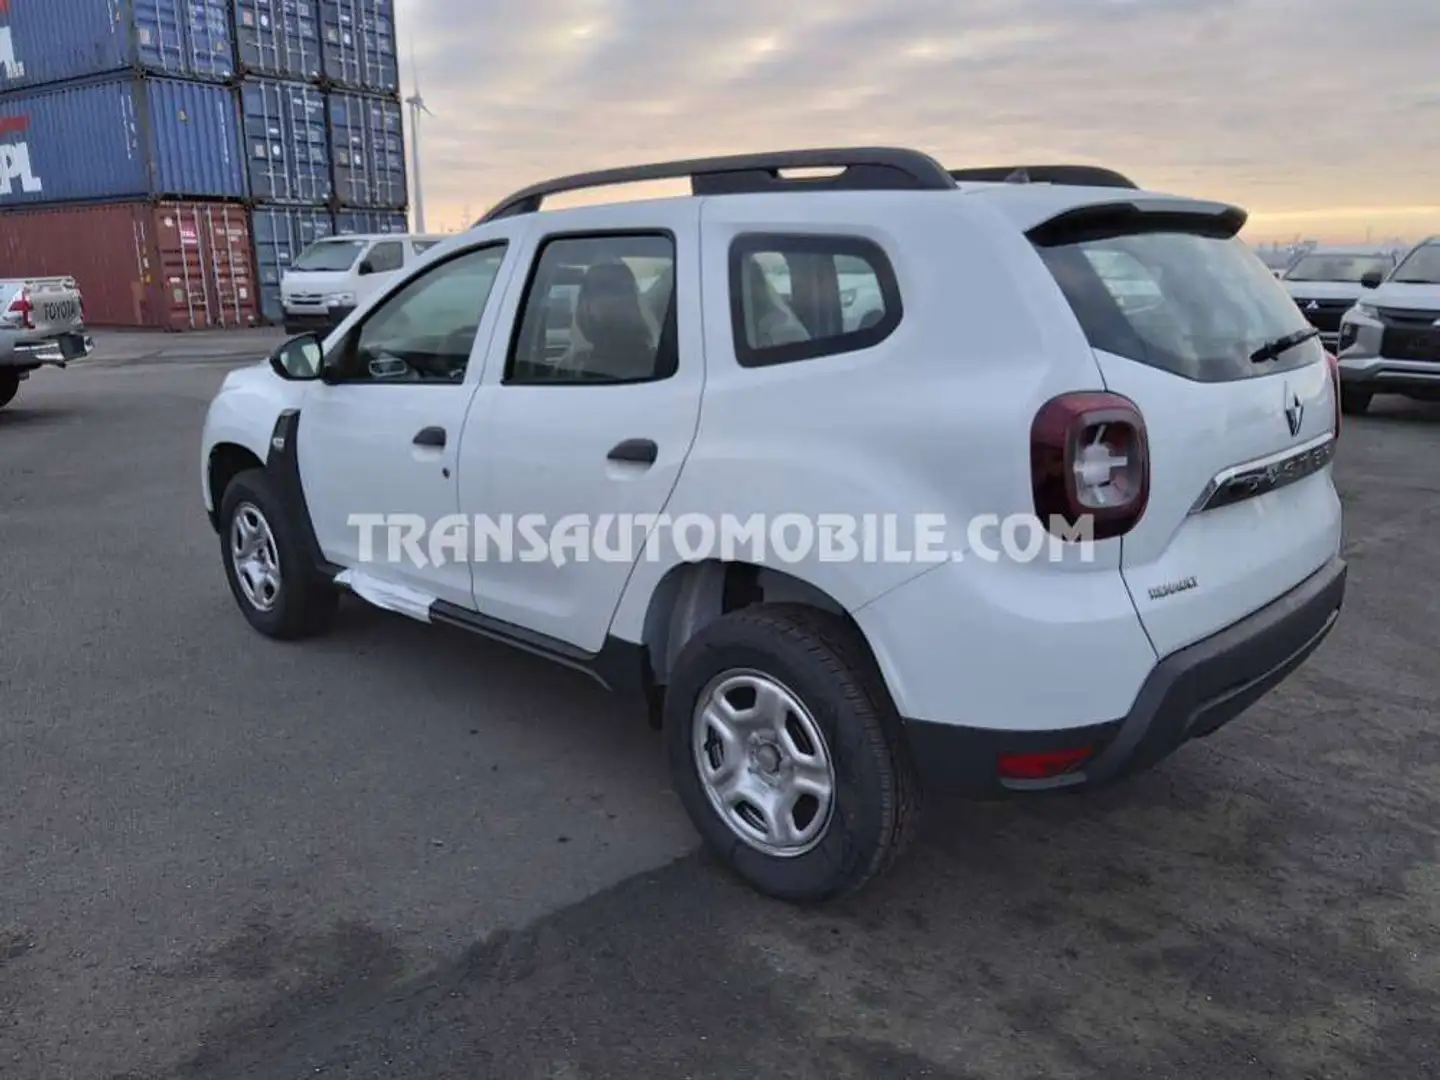 Renault Duster Standard - EXPORT OUT EU TROPICAL VERSION - EXPORT White - 2